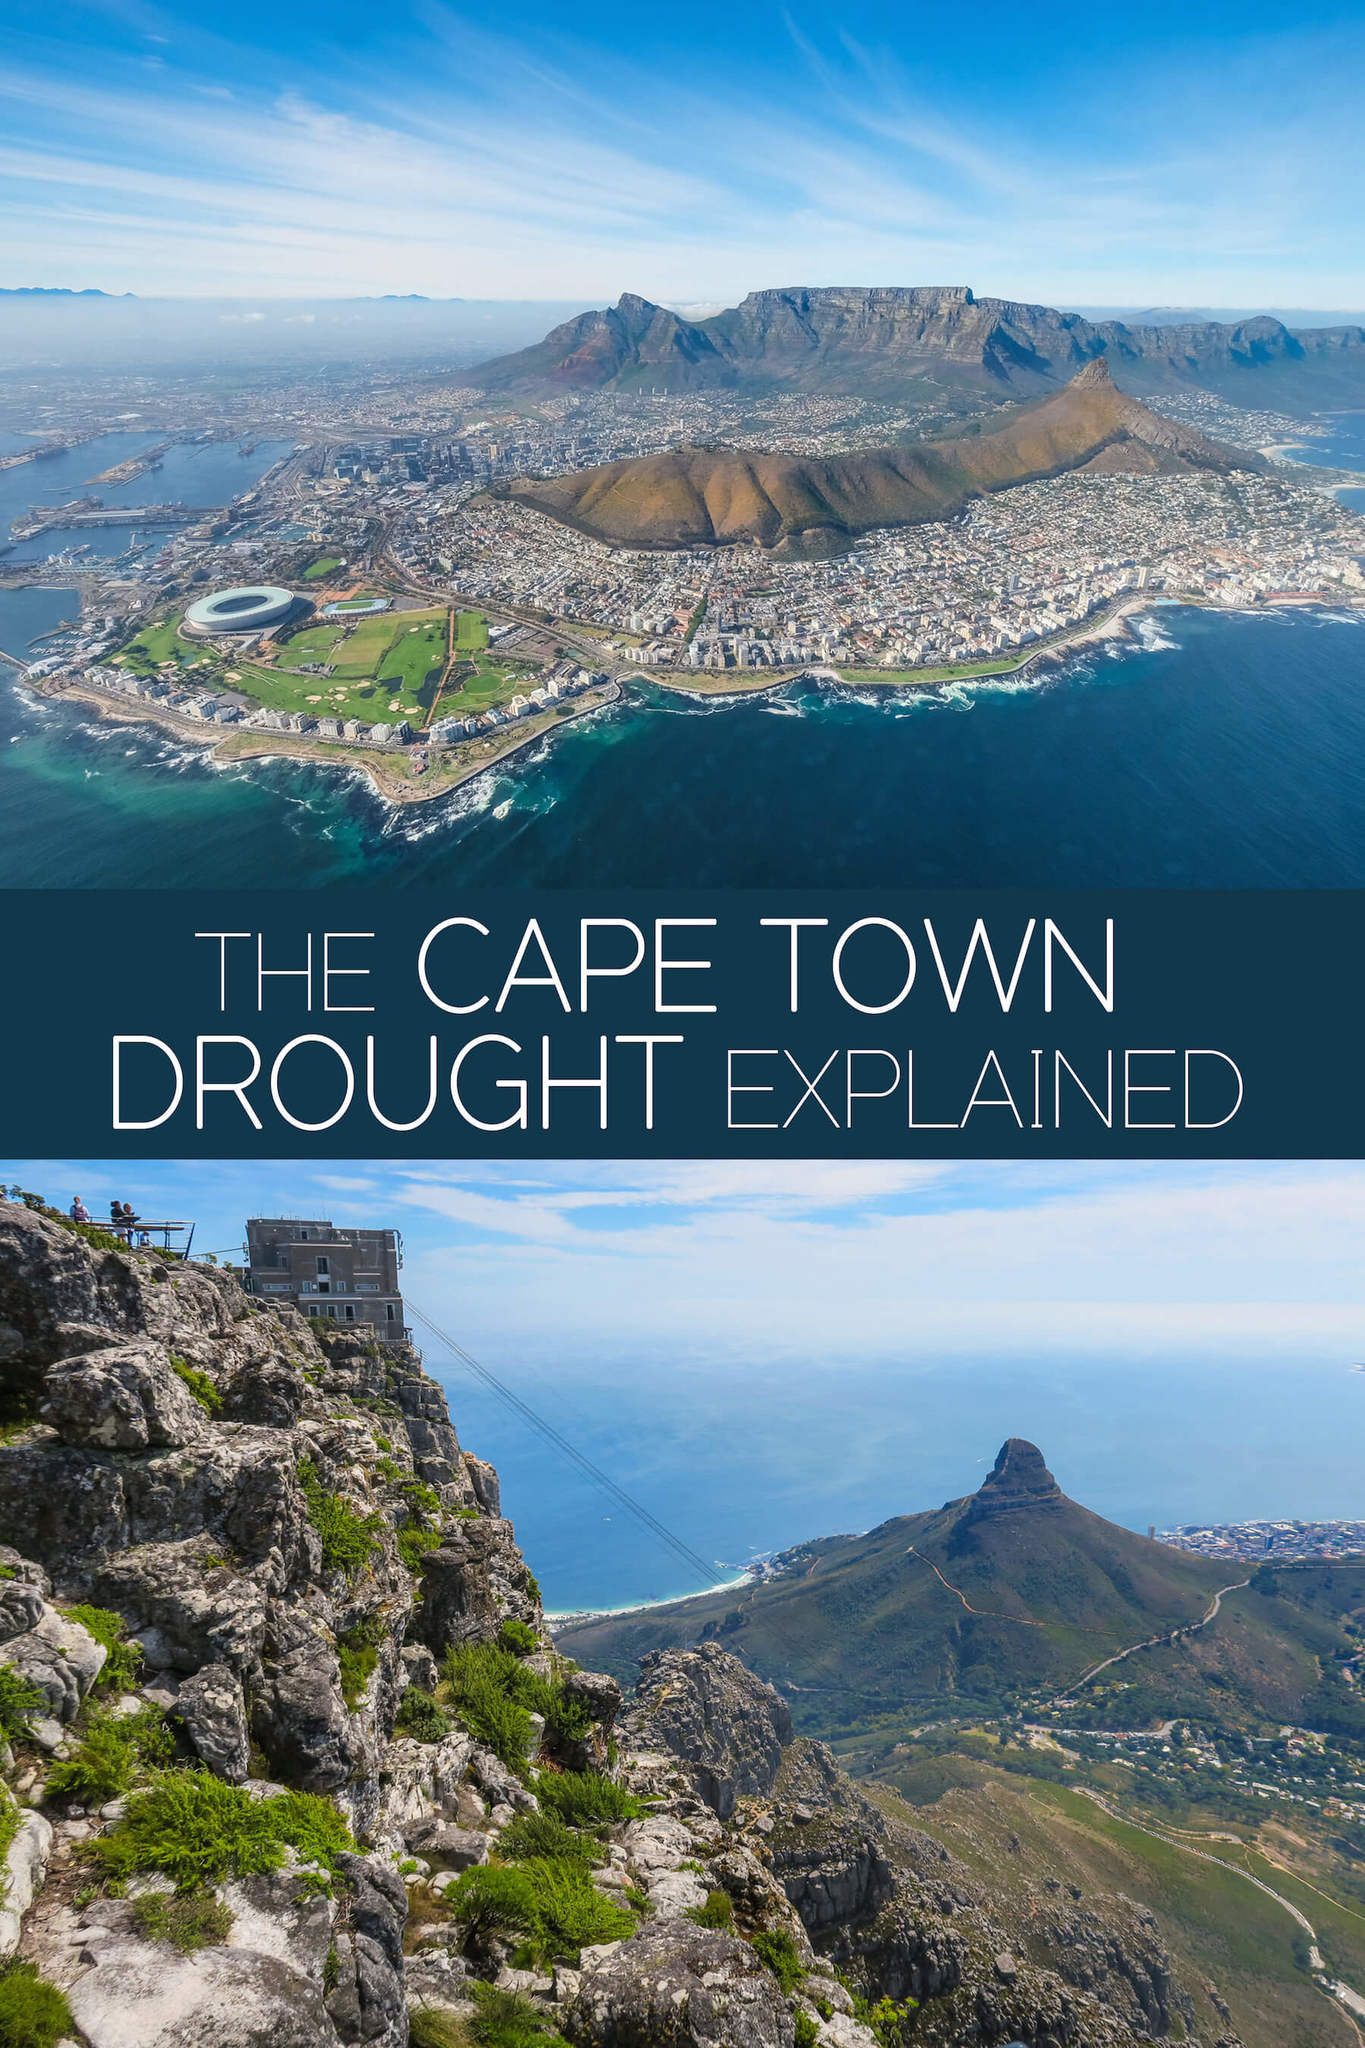 The Cape Town Drought Explained